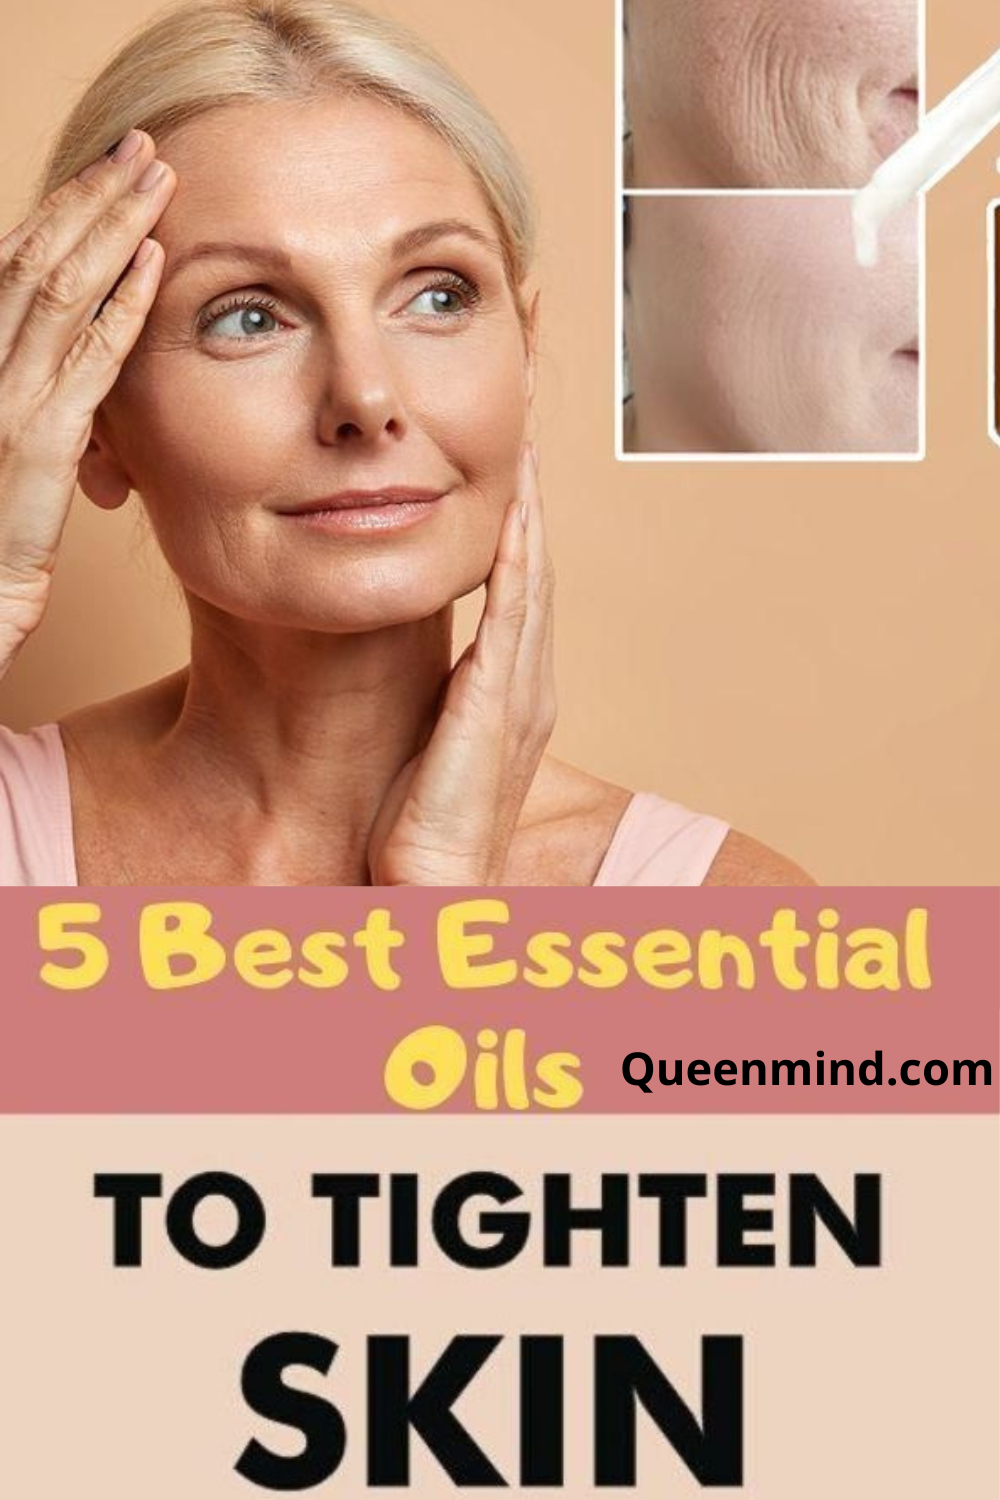 Know 5 Best Essential Oils for Skin Tightening. Make DIY Recipe at Home With Organic Essential Oils For Tightening Skin After Weight Loss 